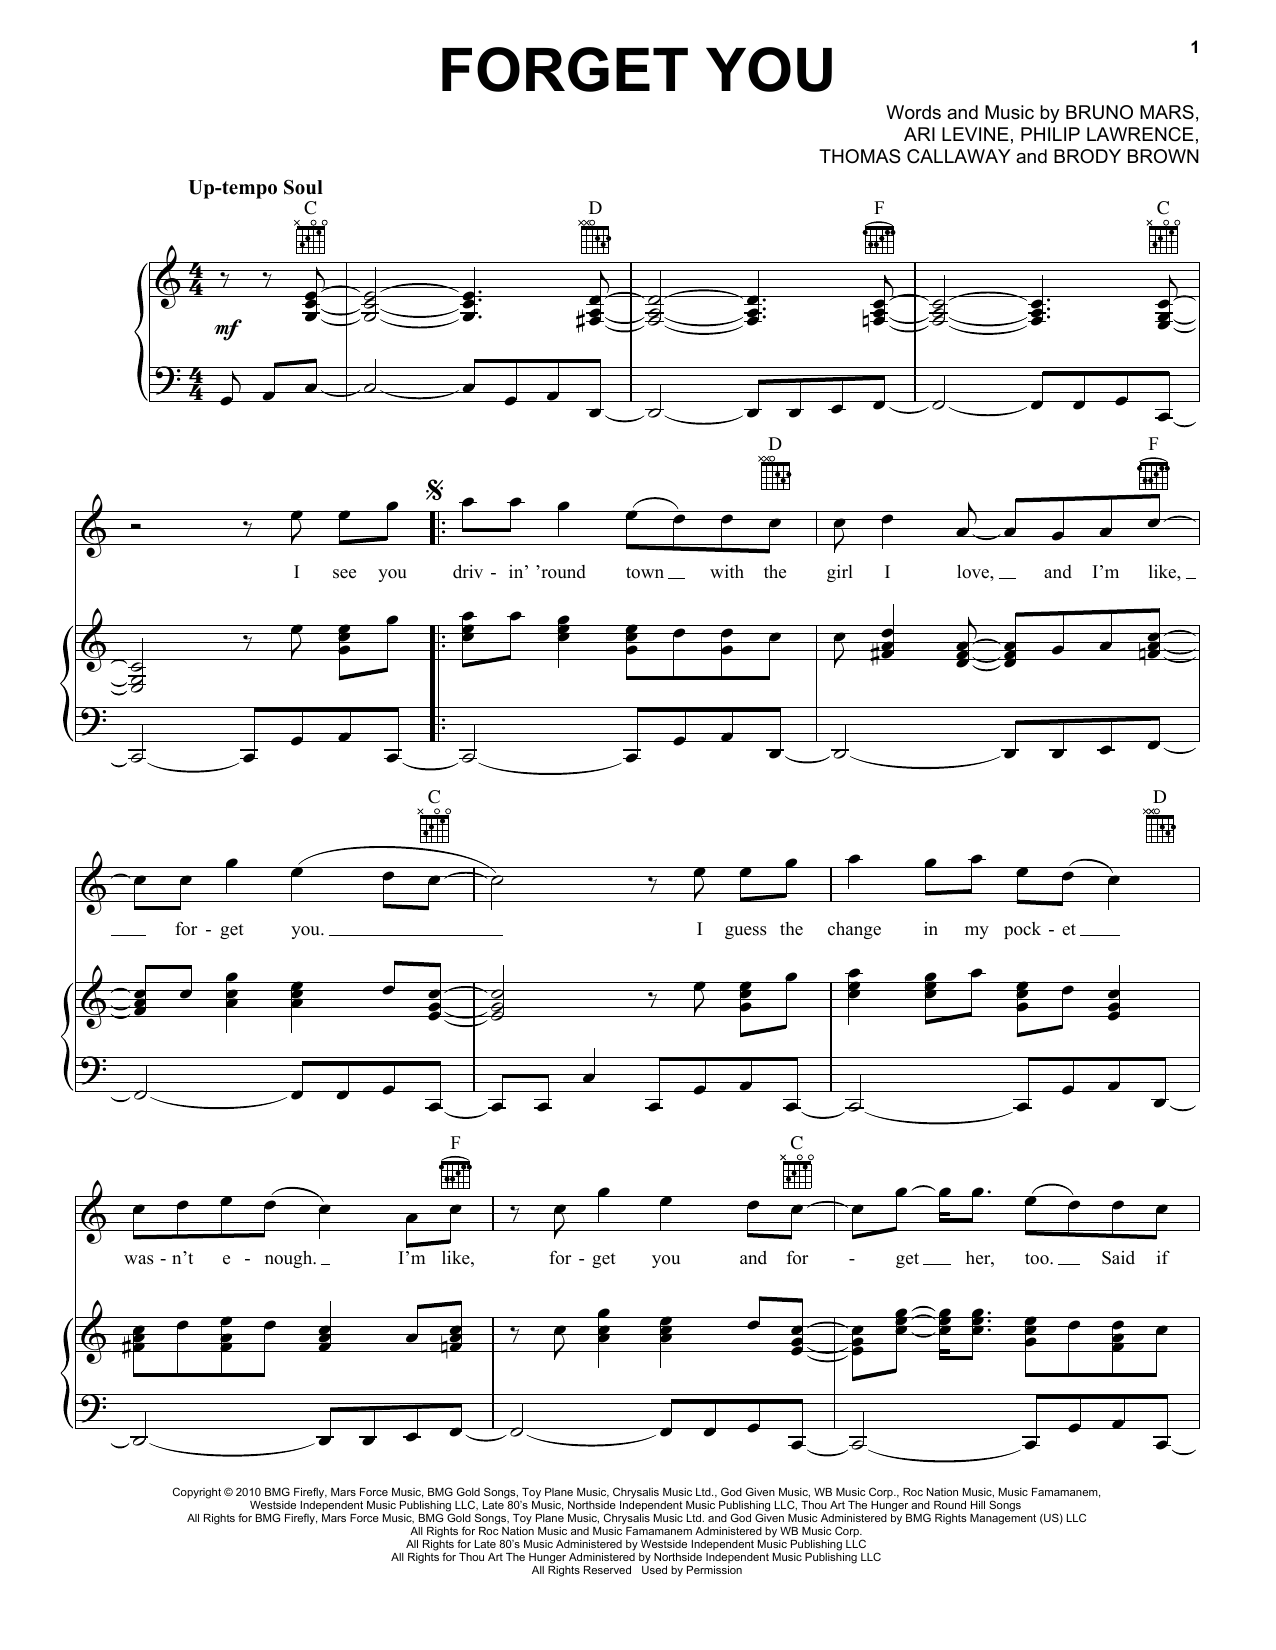 Cee Lo Green F**k You (Forget You) sheet music preview music notes and score for Piano, Vocal & Guitar (Right-Hand Melody) including 8 page(s)